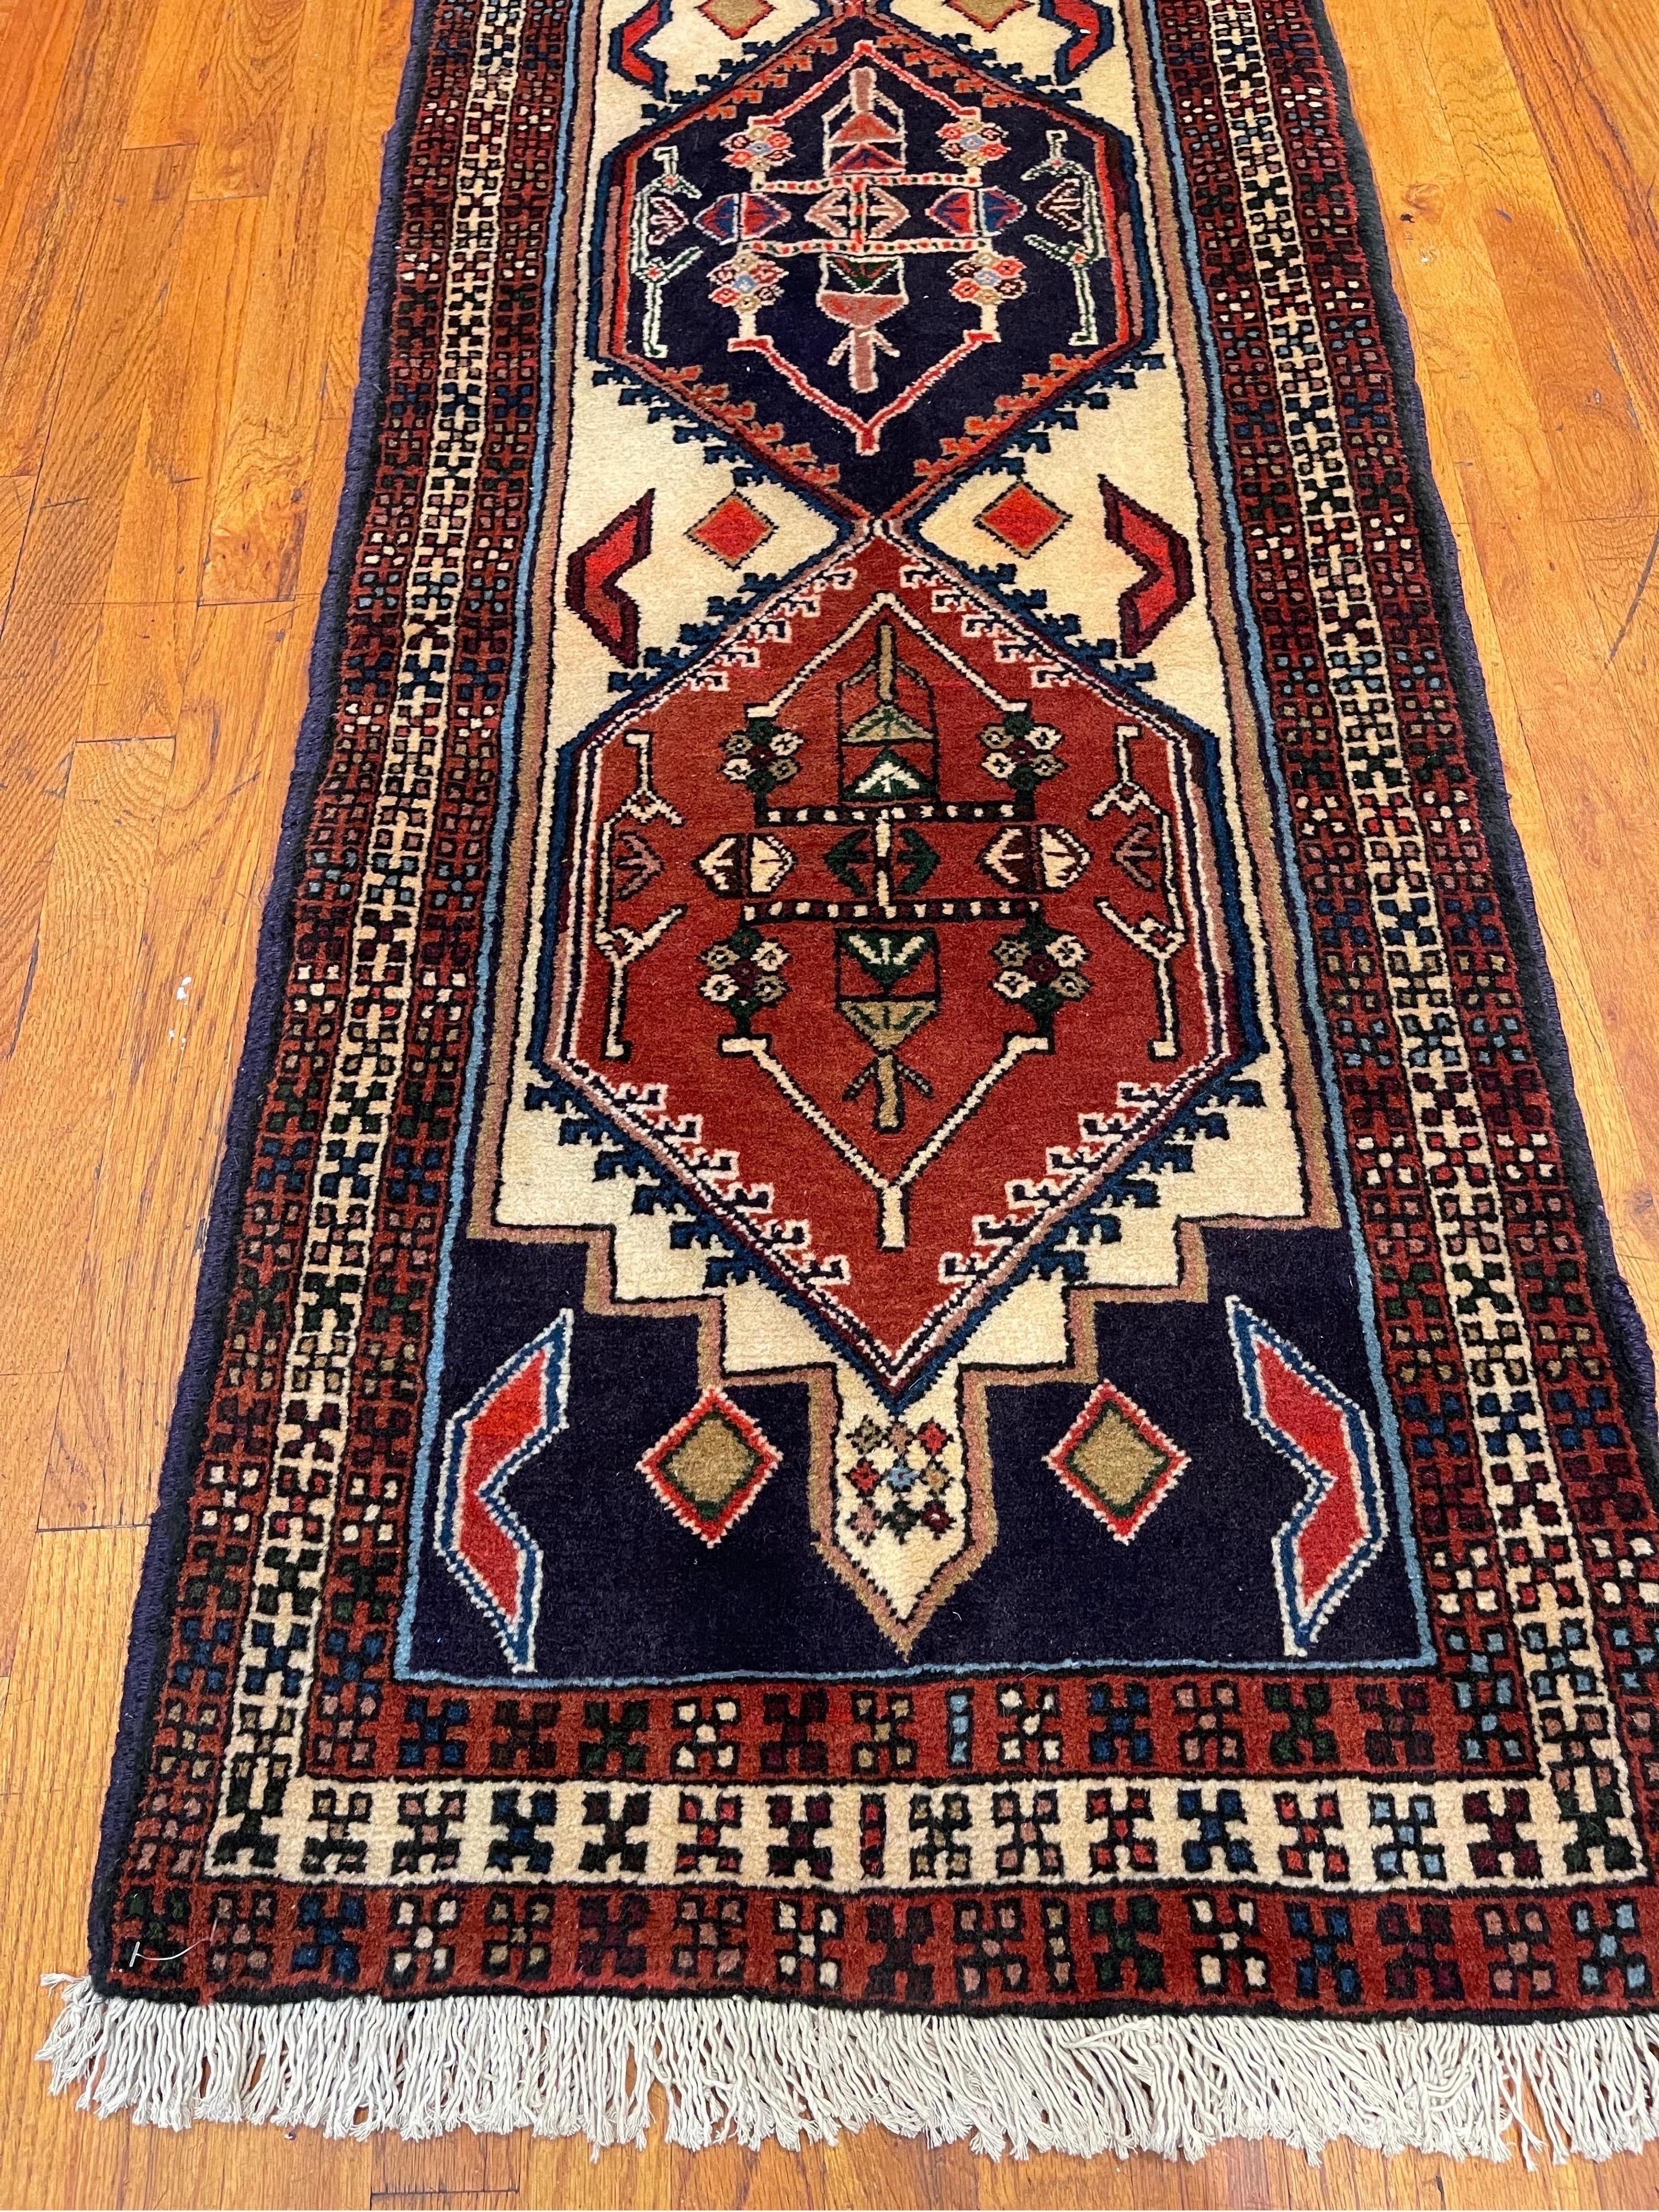 This runner is knotted in the province of Azarbayjan in north-west of Iran. This city is perhaps as ancient rug weaving tradition as is the entire rug history. The design in this piece is geometric with repeated medallion and tribal motifs inspired